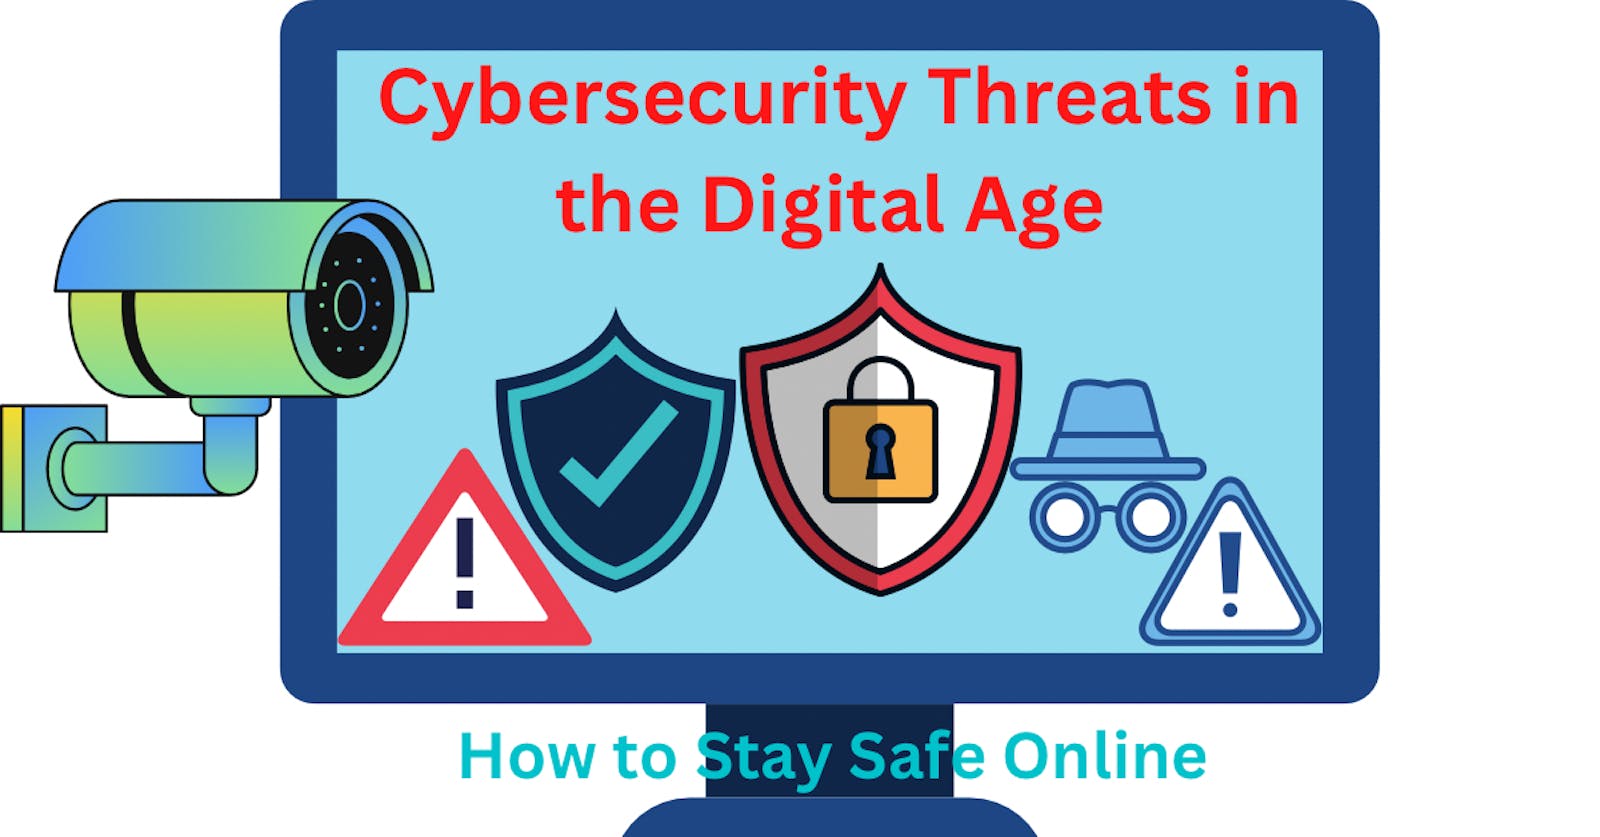 Cybersecurity Threats in the Digital Age: How to Stay Safe Online